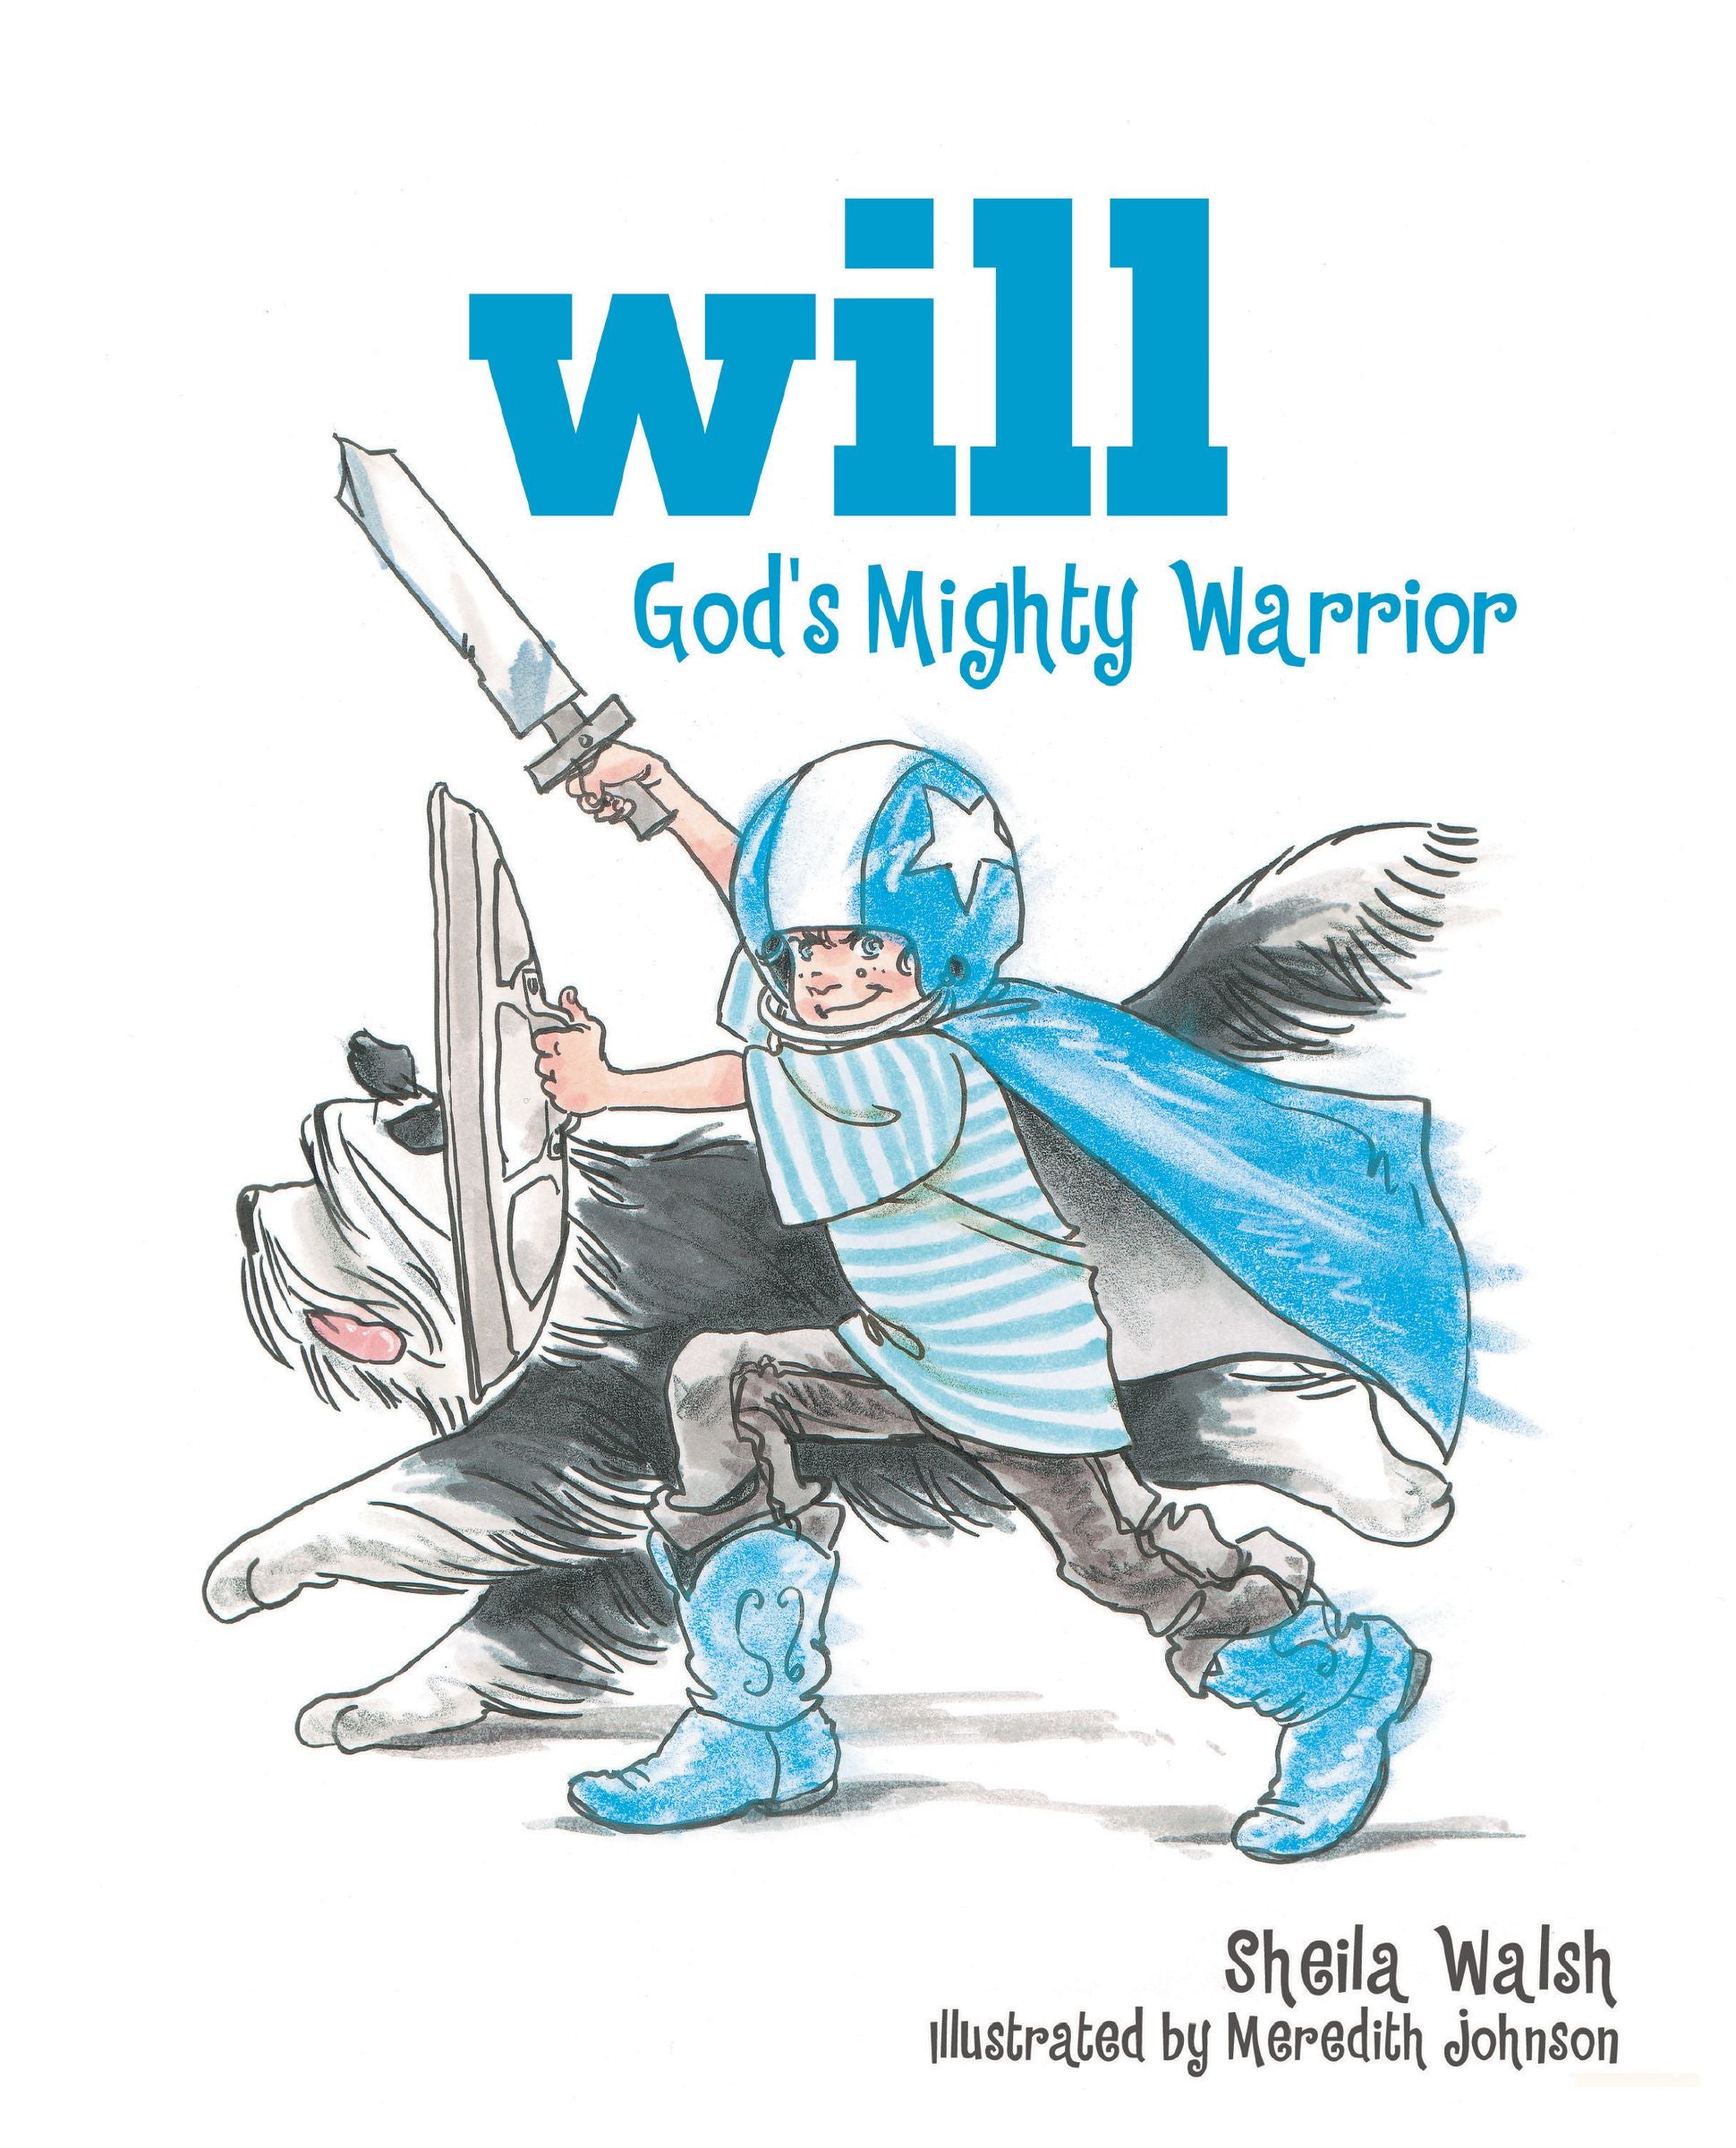 Image of Will Gods Mighty Warrior other